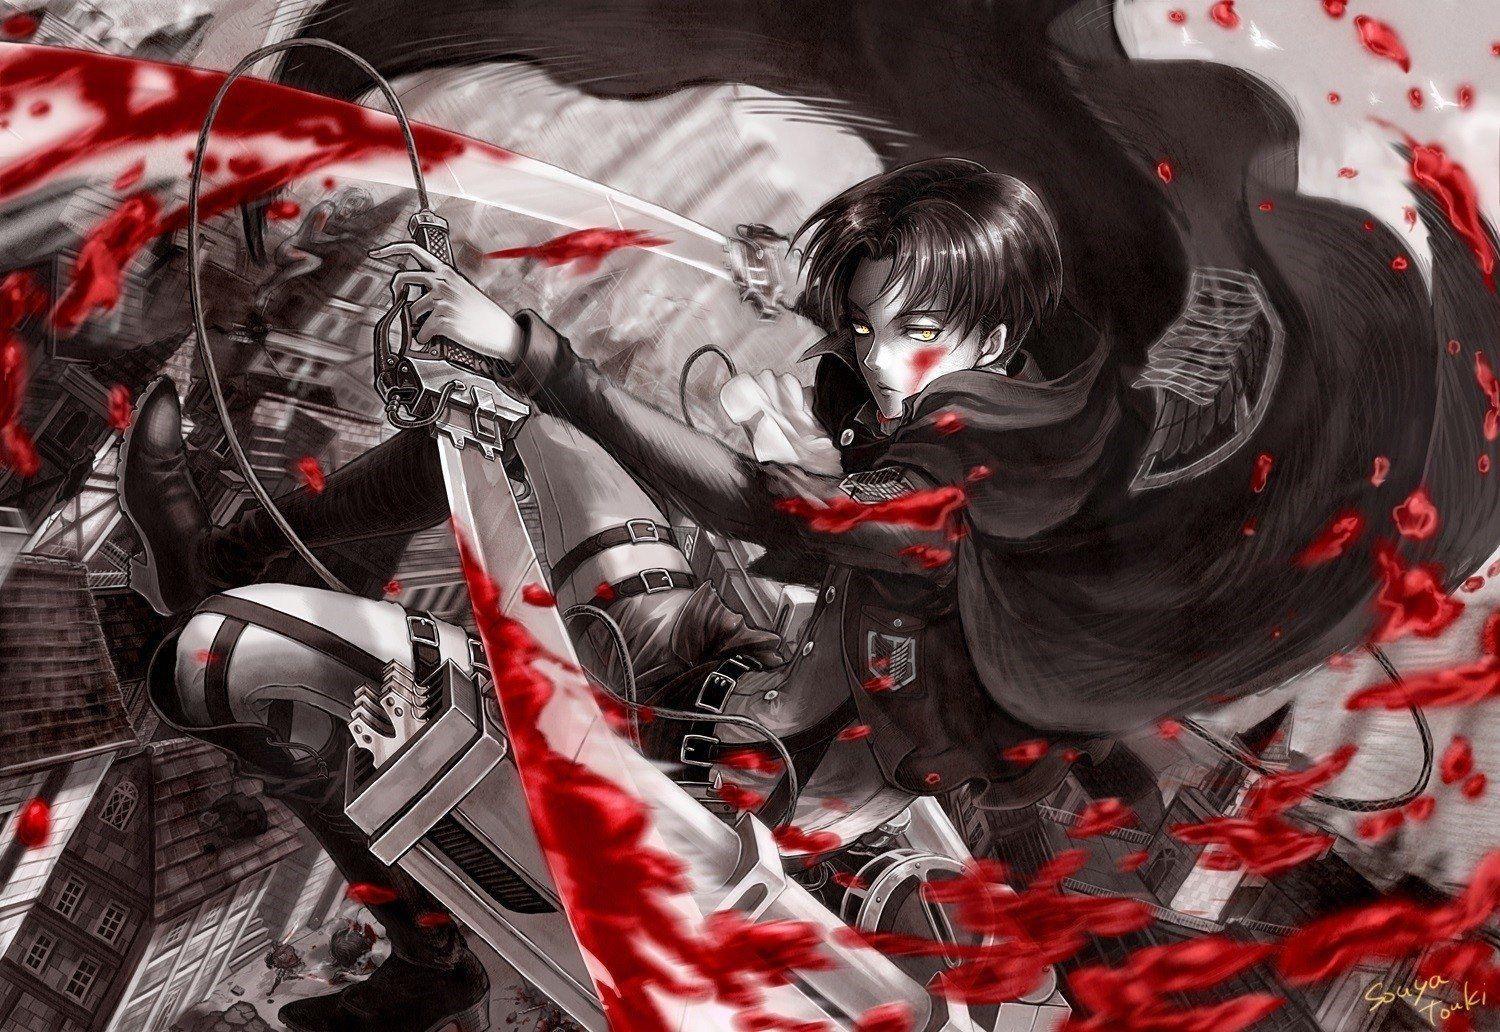 Attack On Titan Hd Wallpapers For Laptop, Attack On Titan, Anime